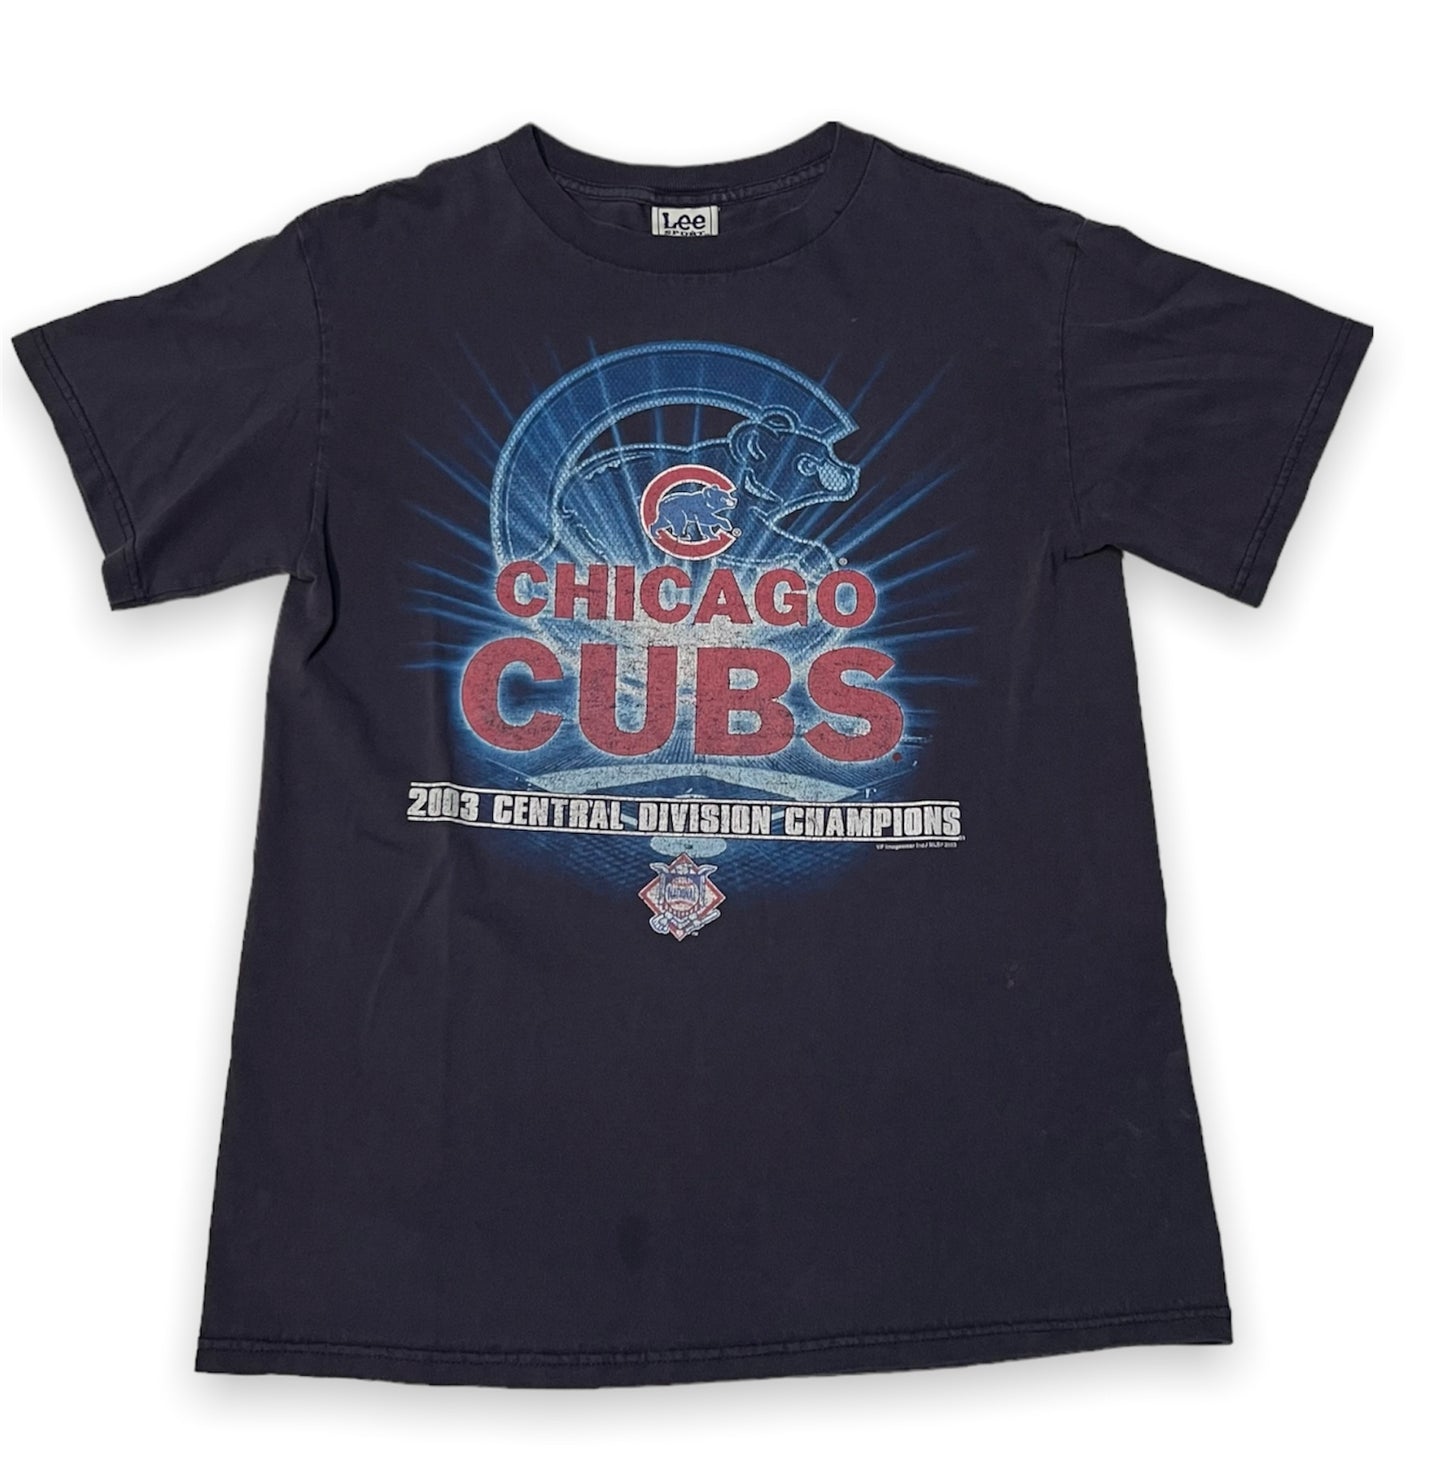 Vintage 00’s Chicago Cubs “Central Division Championship” Tee